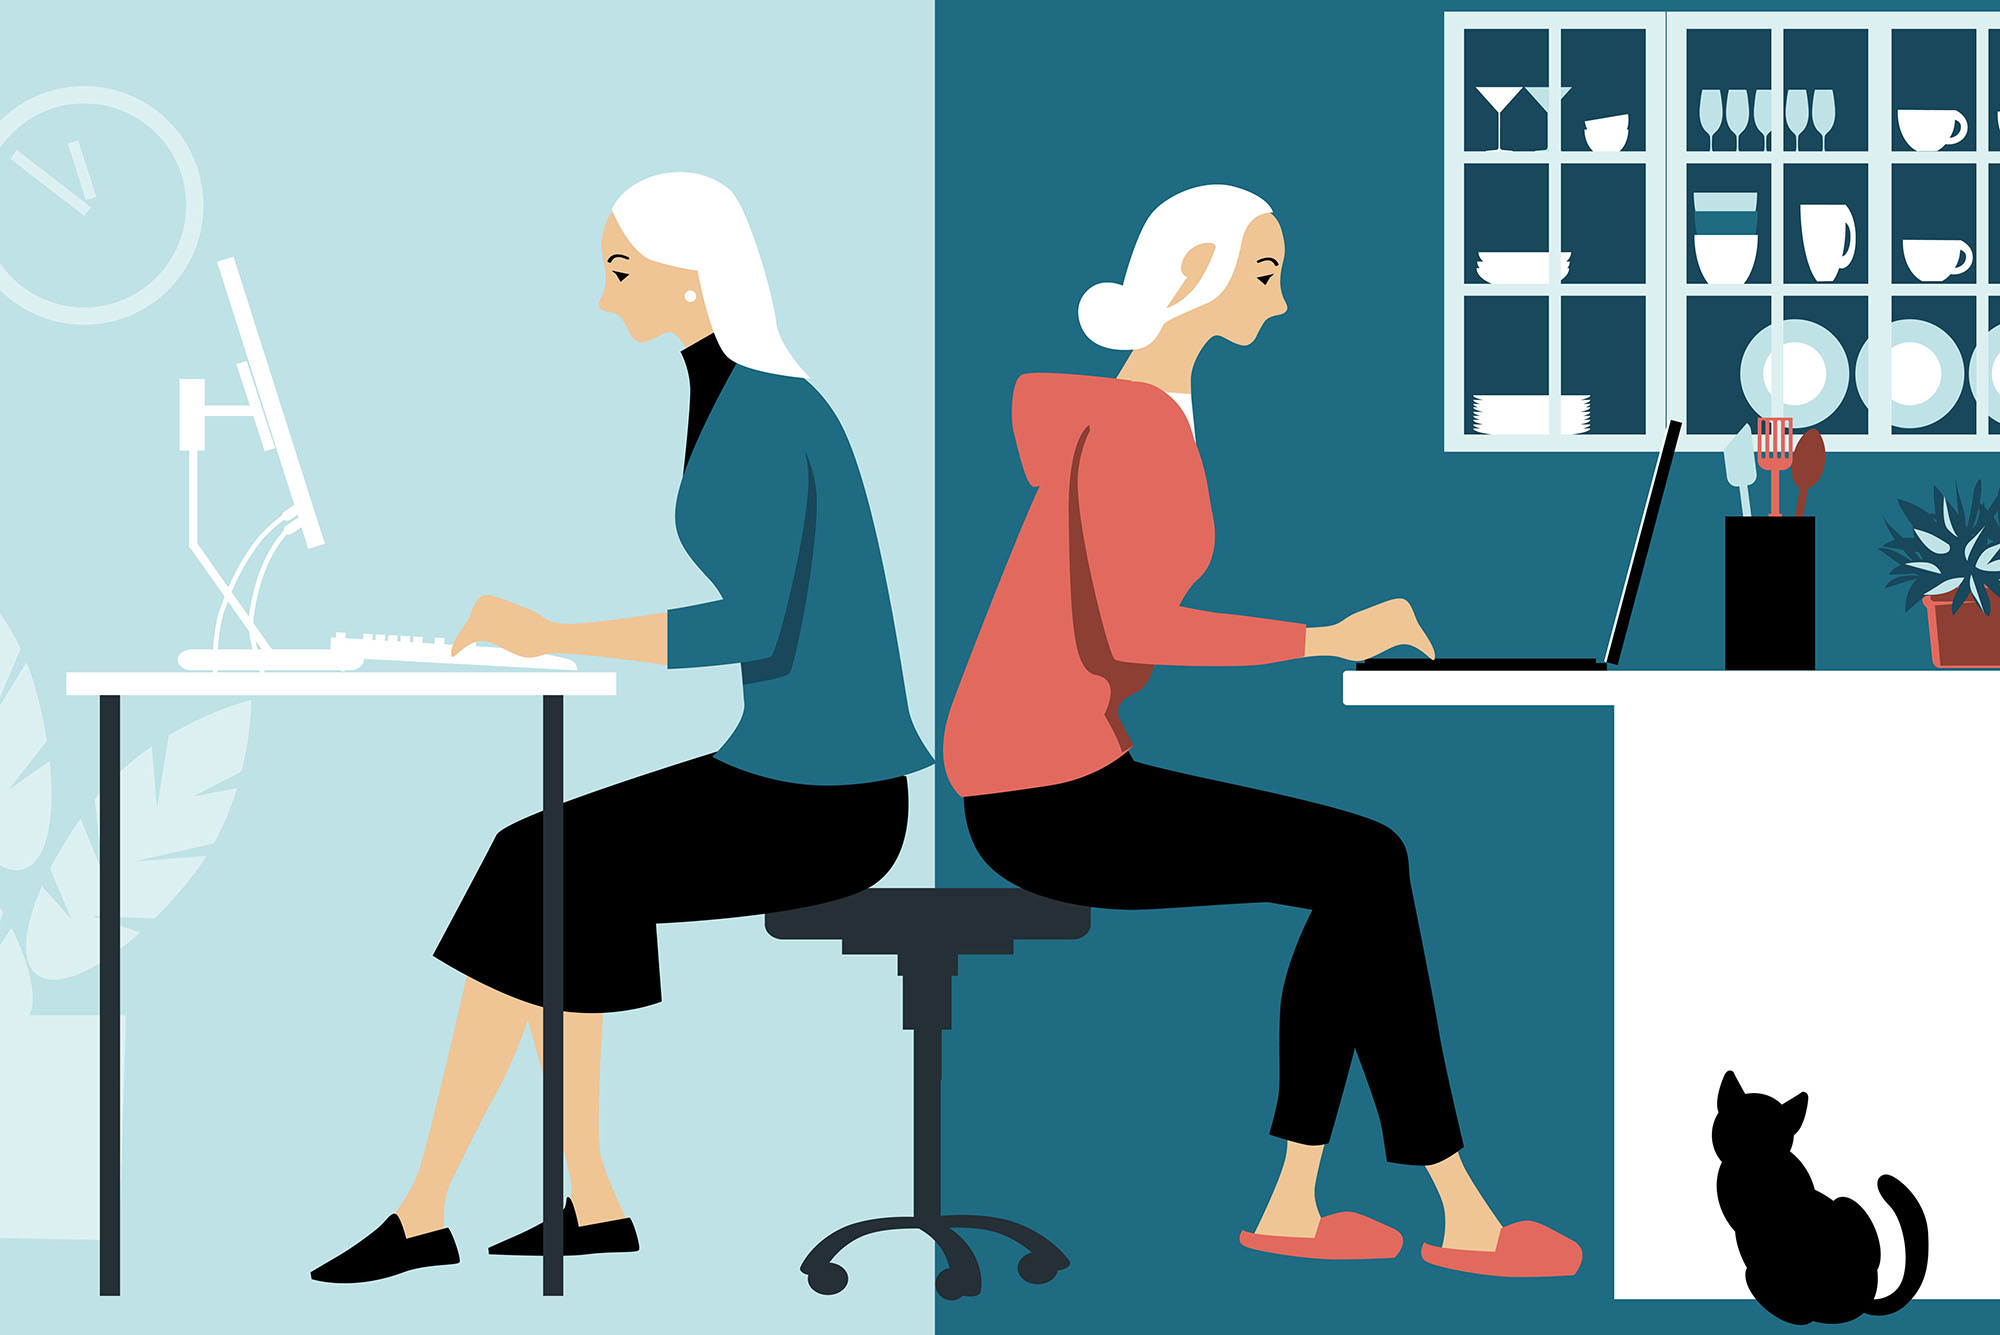 two animated women sit at desks back to back, with one side of the graphic a light grey and the other side a darker grey/blue.